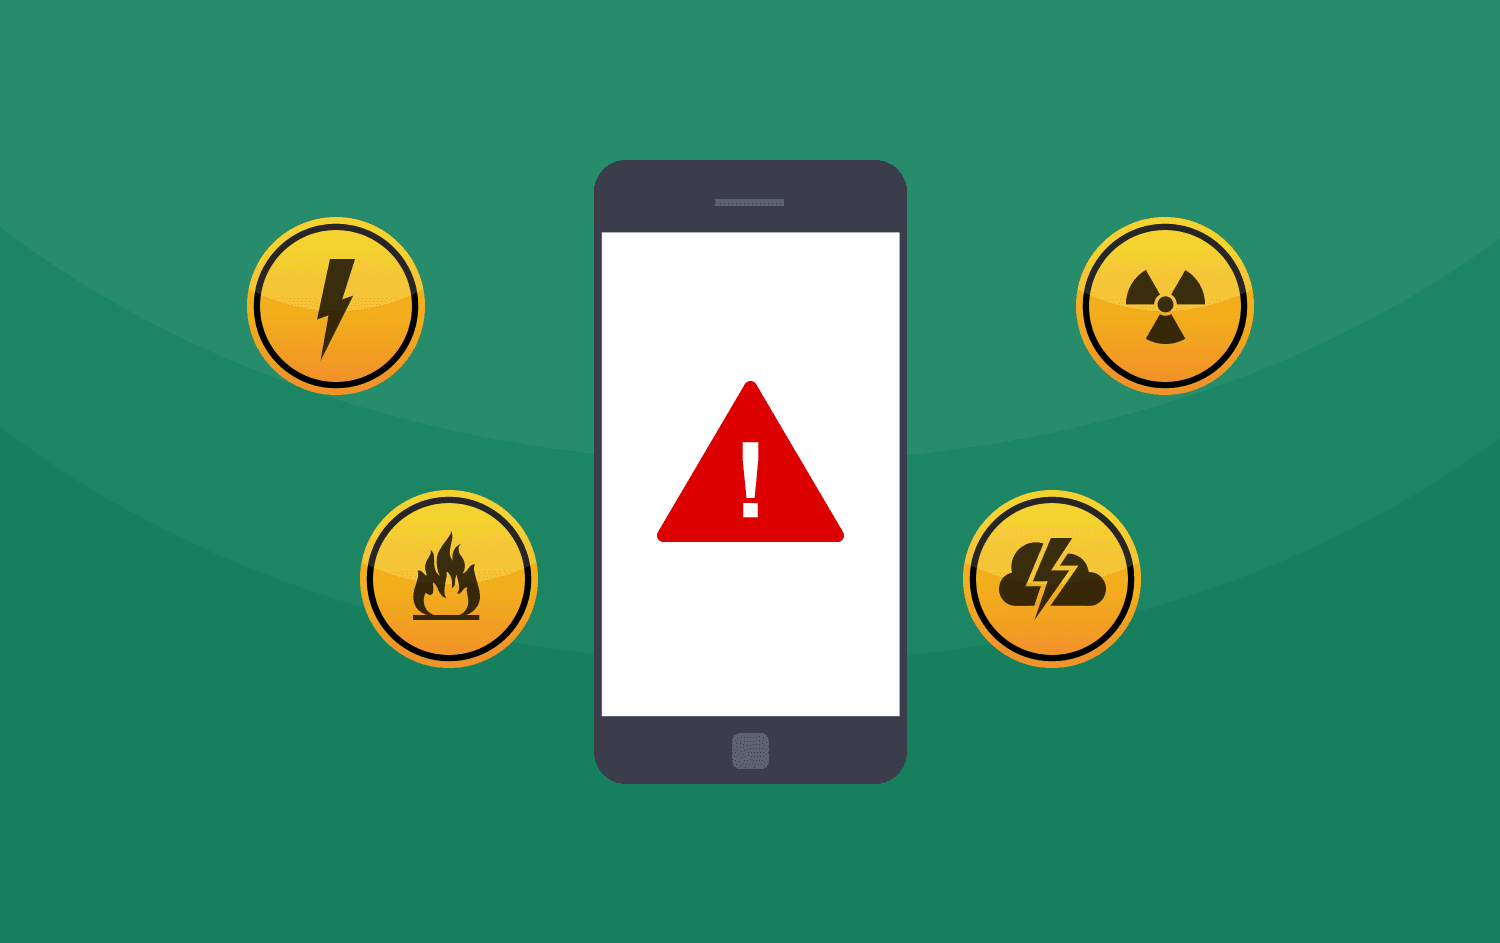  Cartoon representation of various safety threats such as severe weather, a hazardous spill, and a power outage, with “warning” symbol and a smartphone